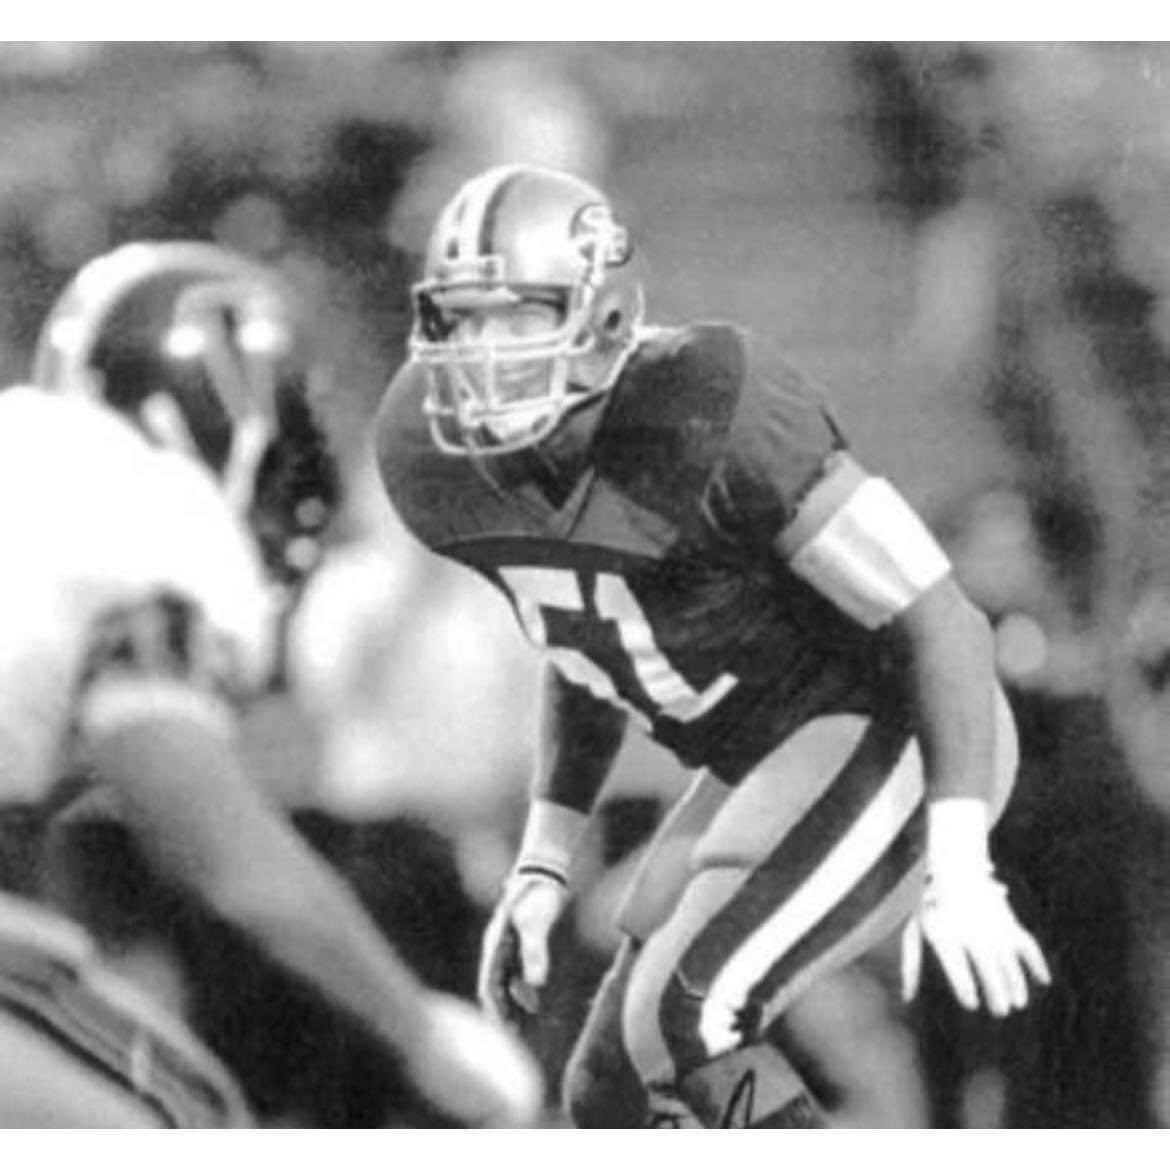 Three Time All American, Legendary @BroncoSportsFB Hall Of Fame LB, and San Francisco @49ers Carl Keever has his sights set on raising 100K this year for his Beyond Blue Scholarship fund through his Blue Elevation Nonprofit that will help struggling OKG’s (Our Kinda Guys & Gals)